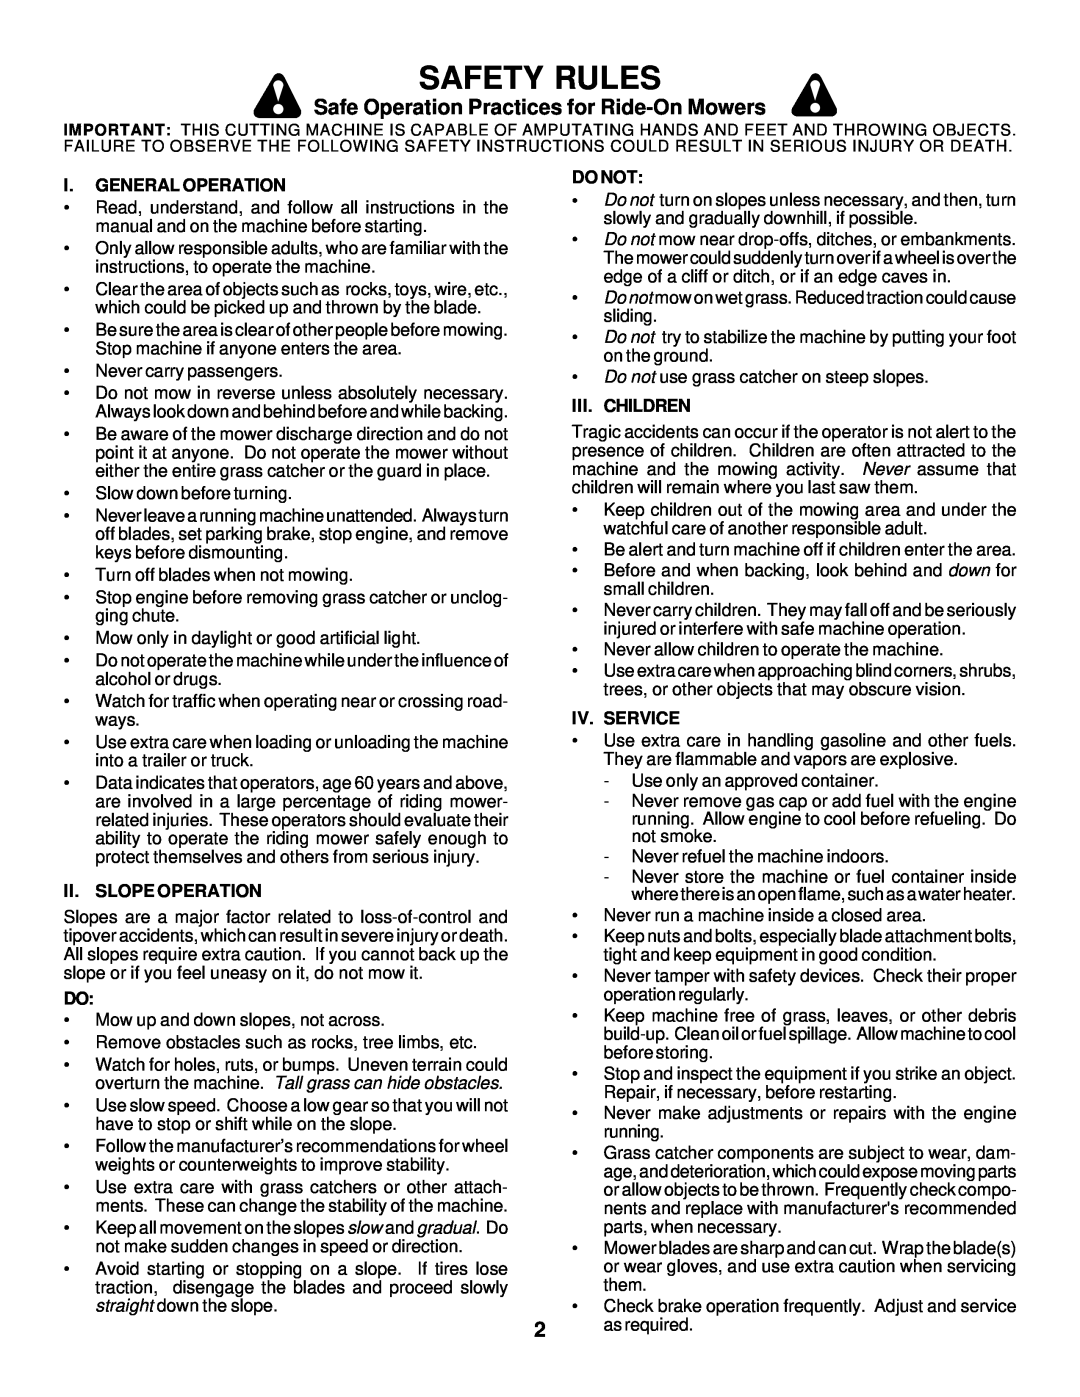 Husqvarna GTH225 owner manual Safety Rules, Safe Operation Practices for Ride-On Mowers 